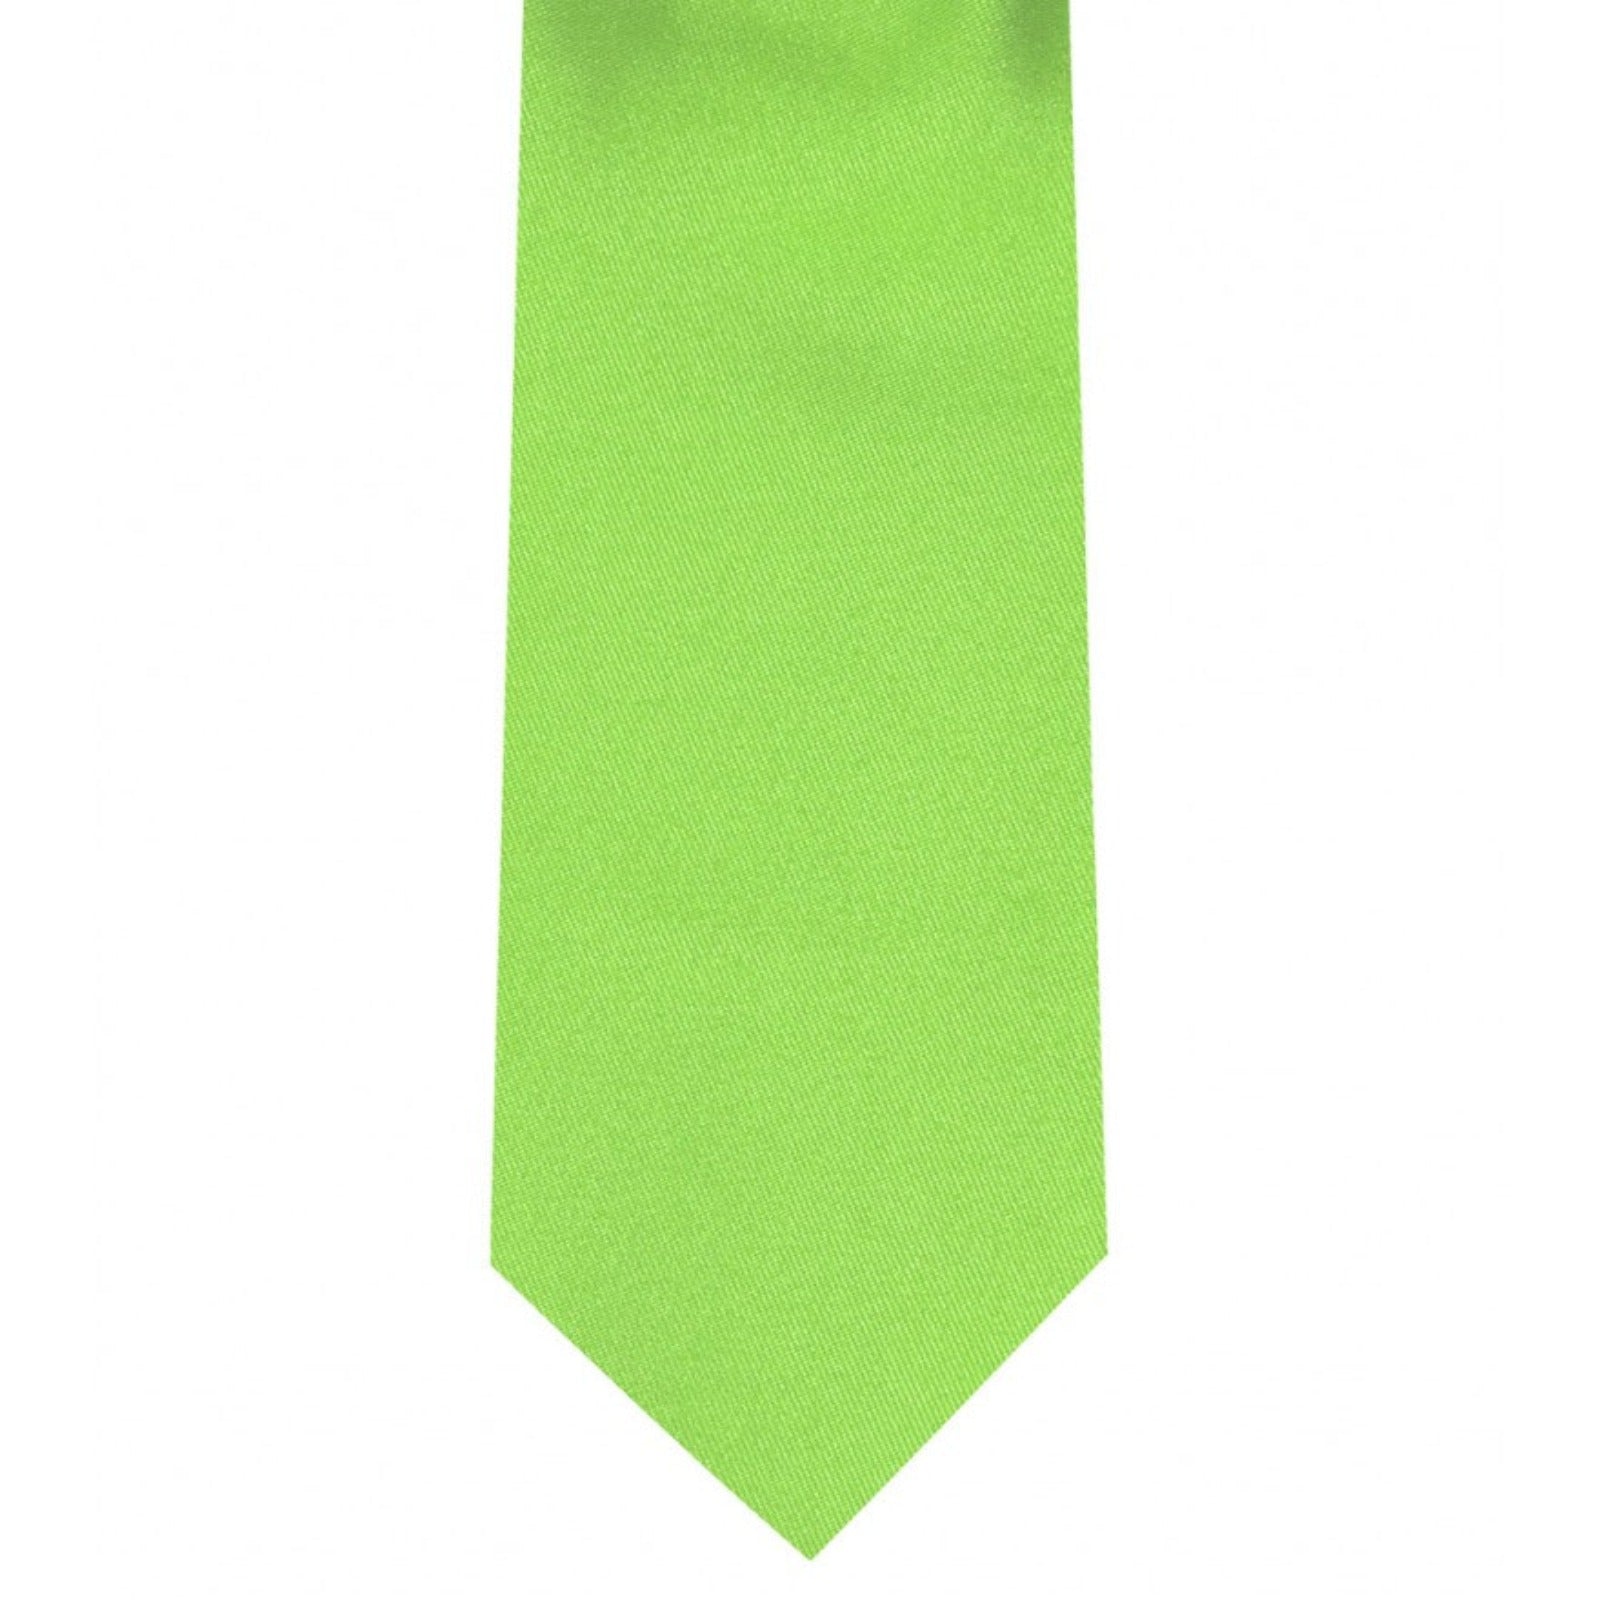 Classic Lime Tie Ultra Skinny tie width 2.25 inches With Matching Pocket Square | KCT Menswear